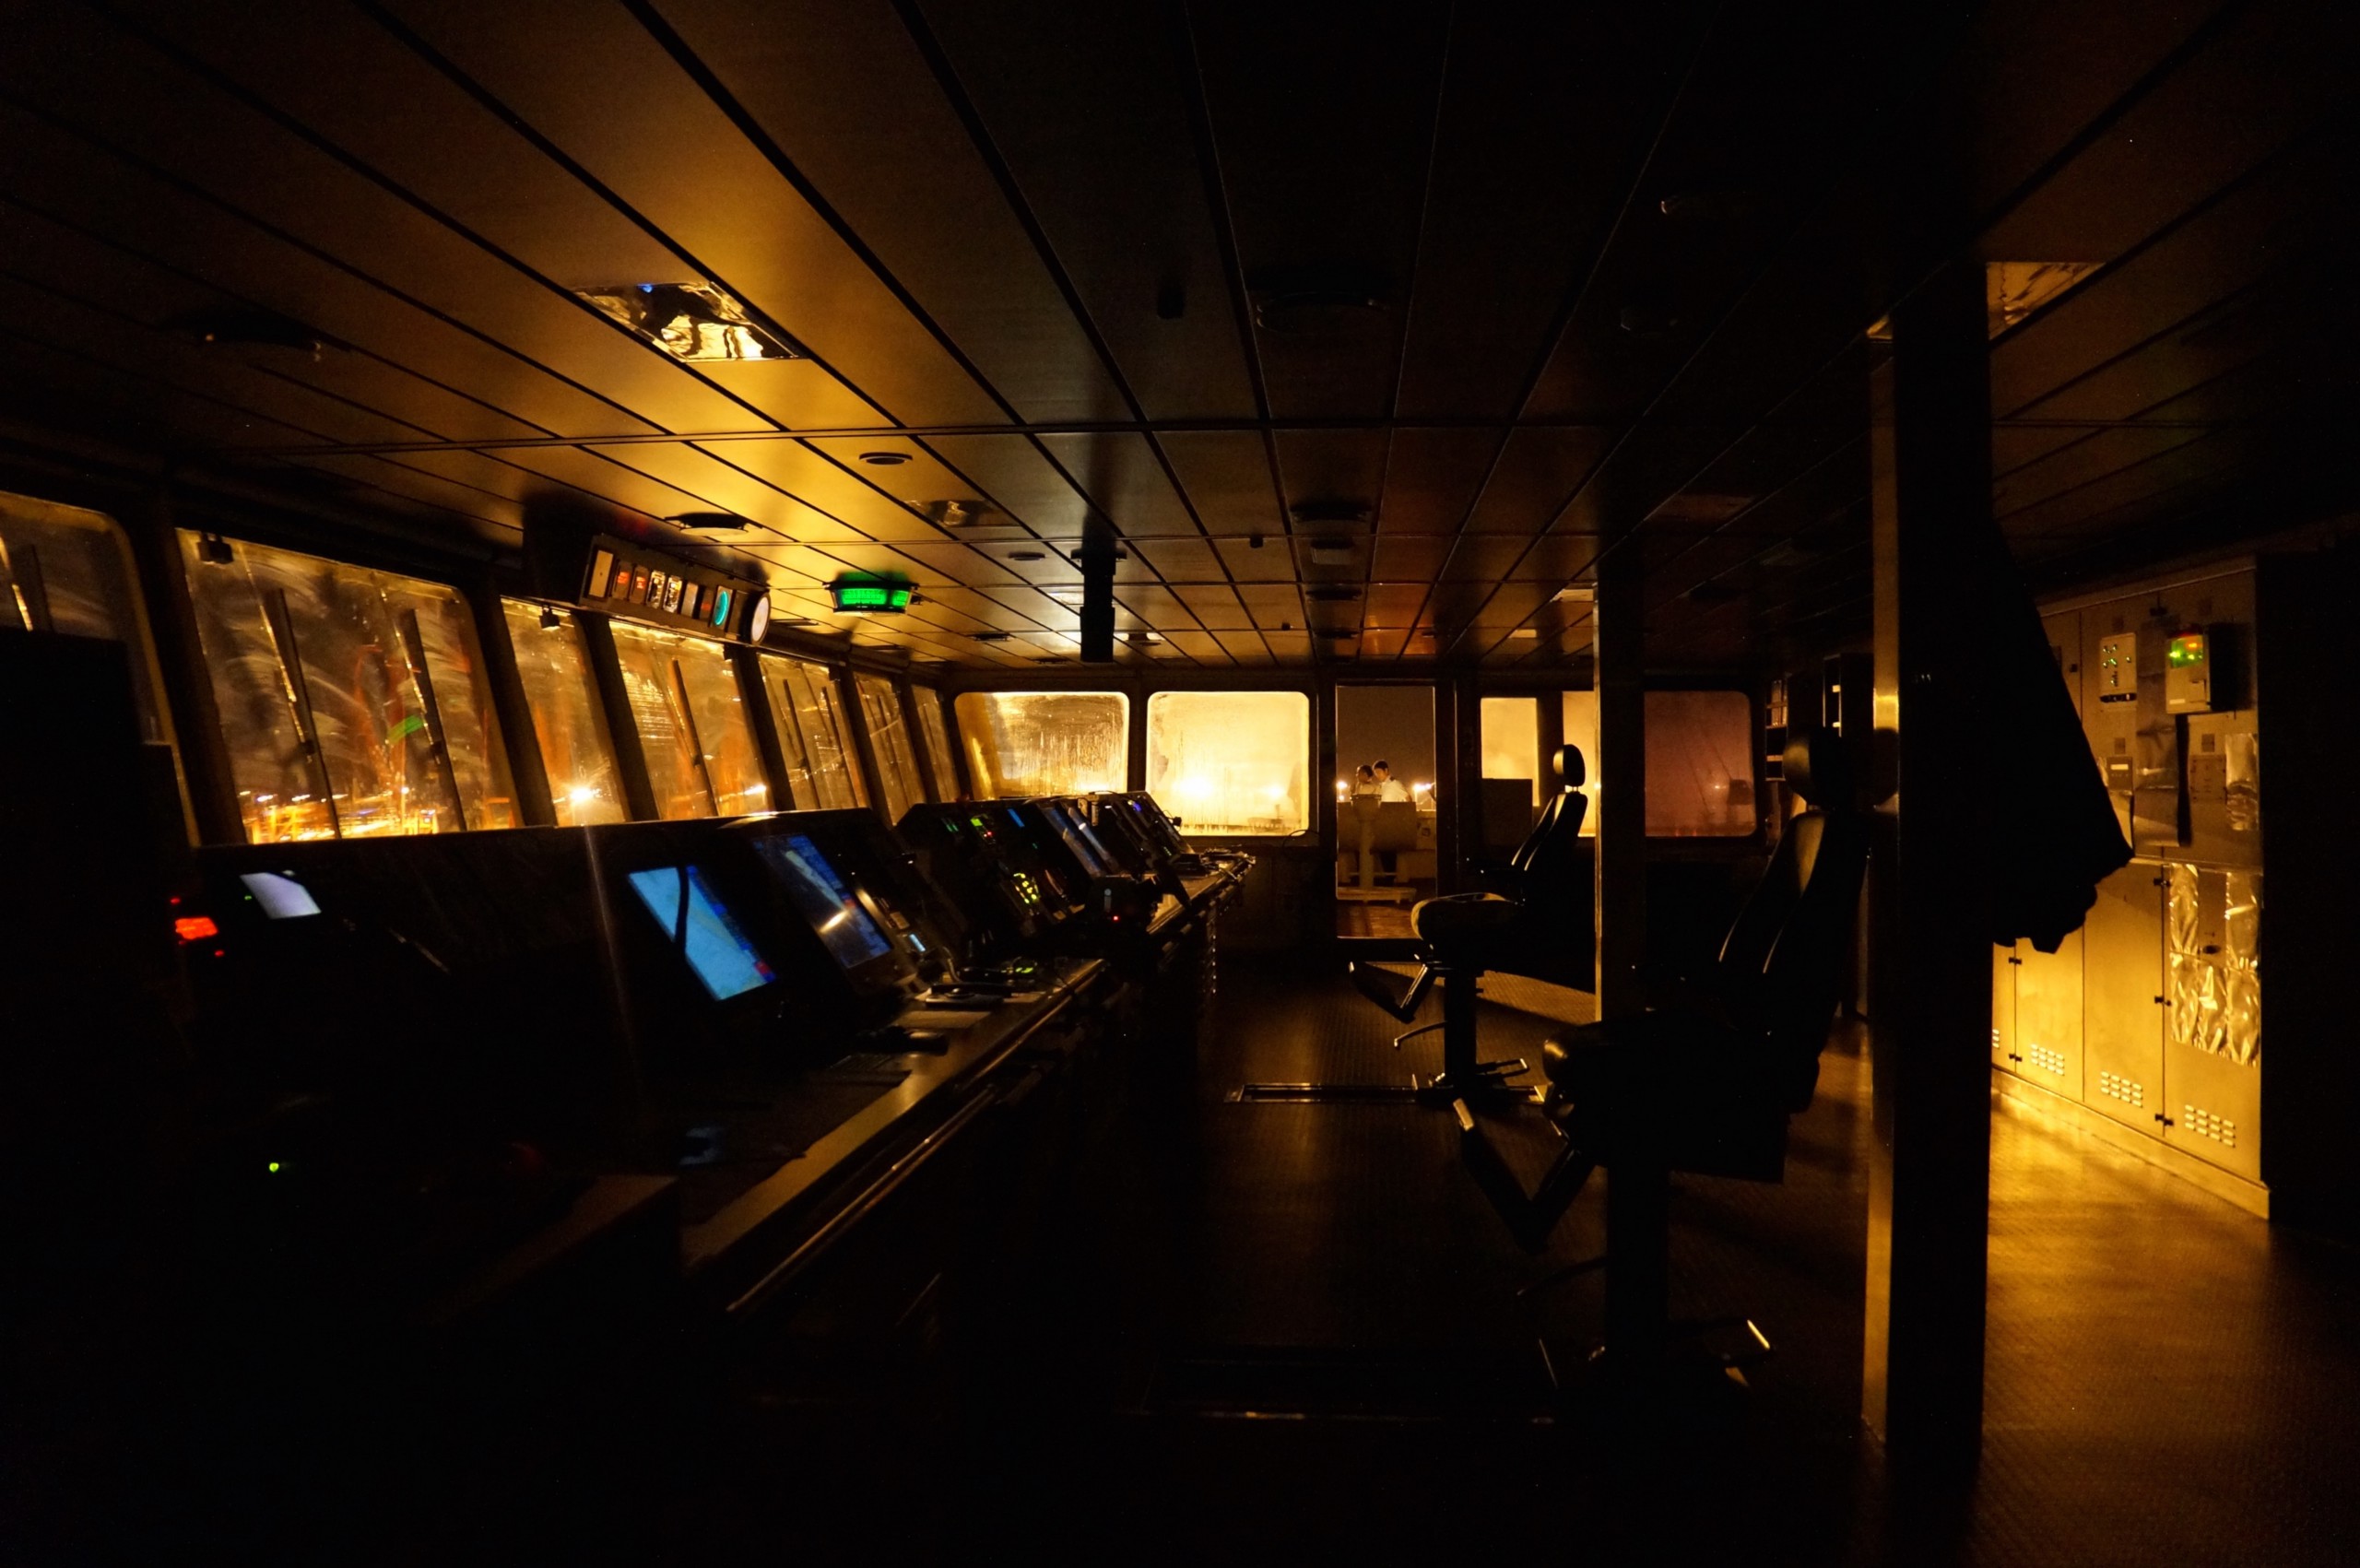 The bridge of a container ship. Many computer screens line a console against the forward-facing window, along with radio and other communications equipment.